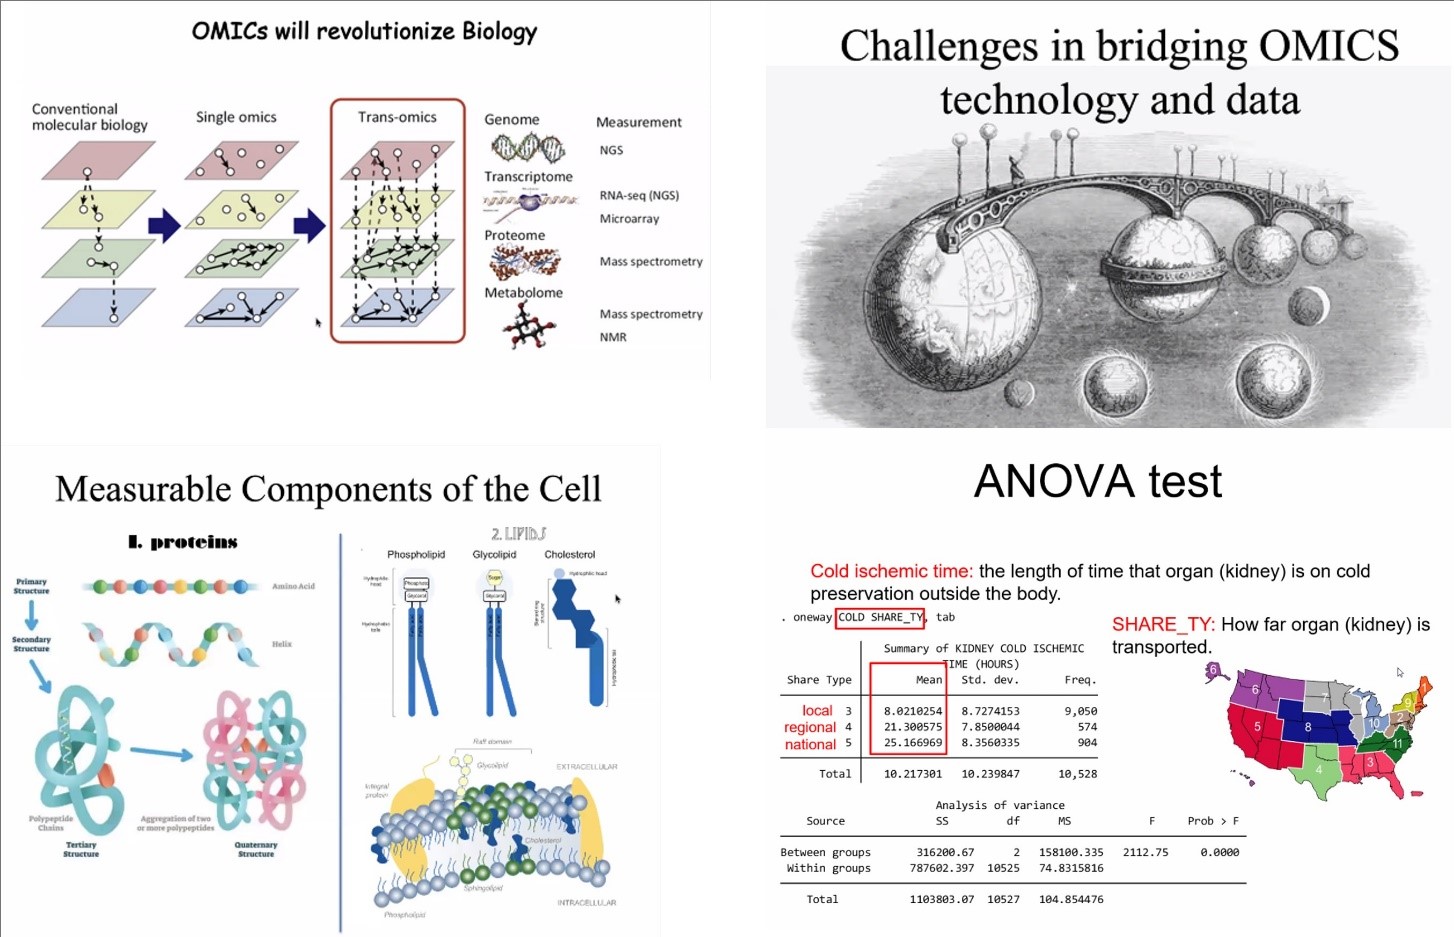 A collage of images with information on OMICs, Measurable Components of a Cell, and ANOVA test